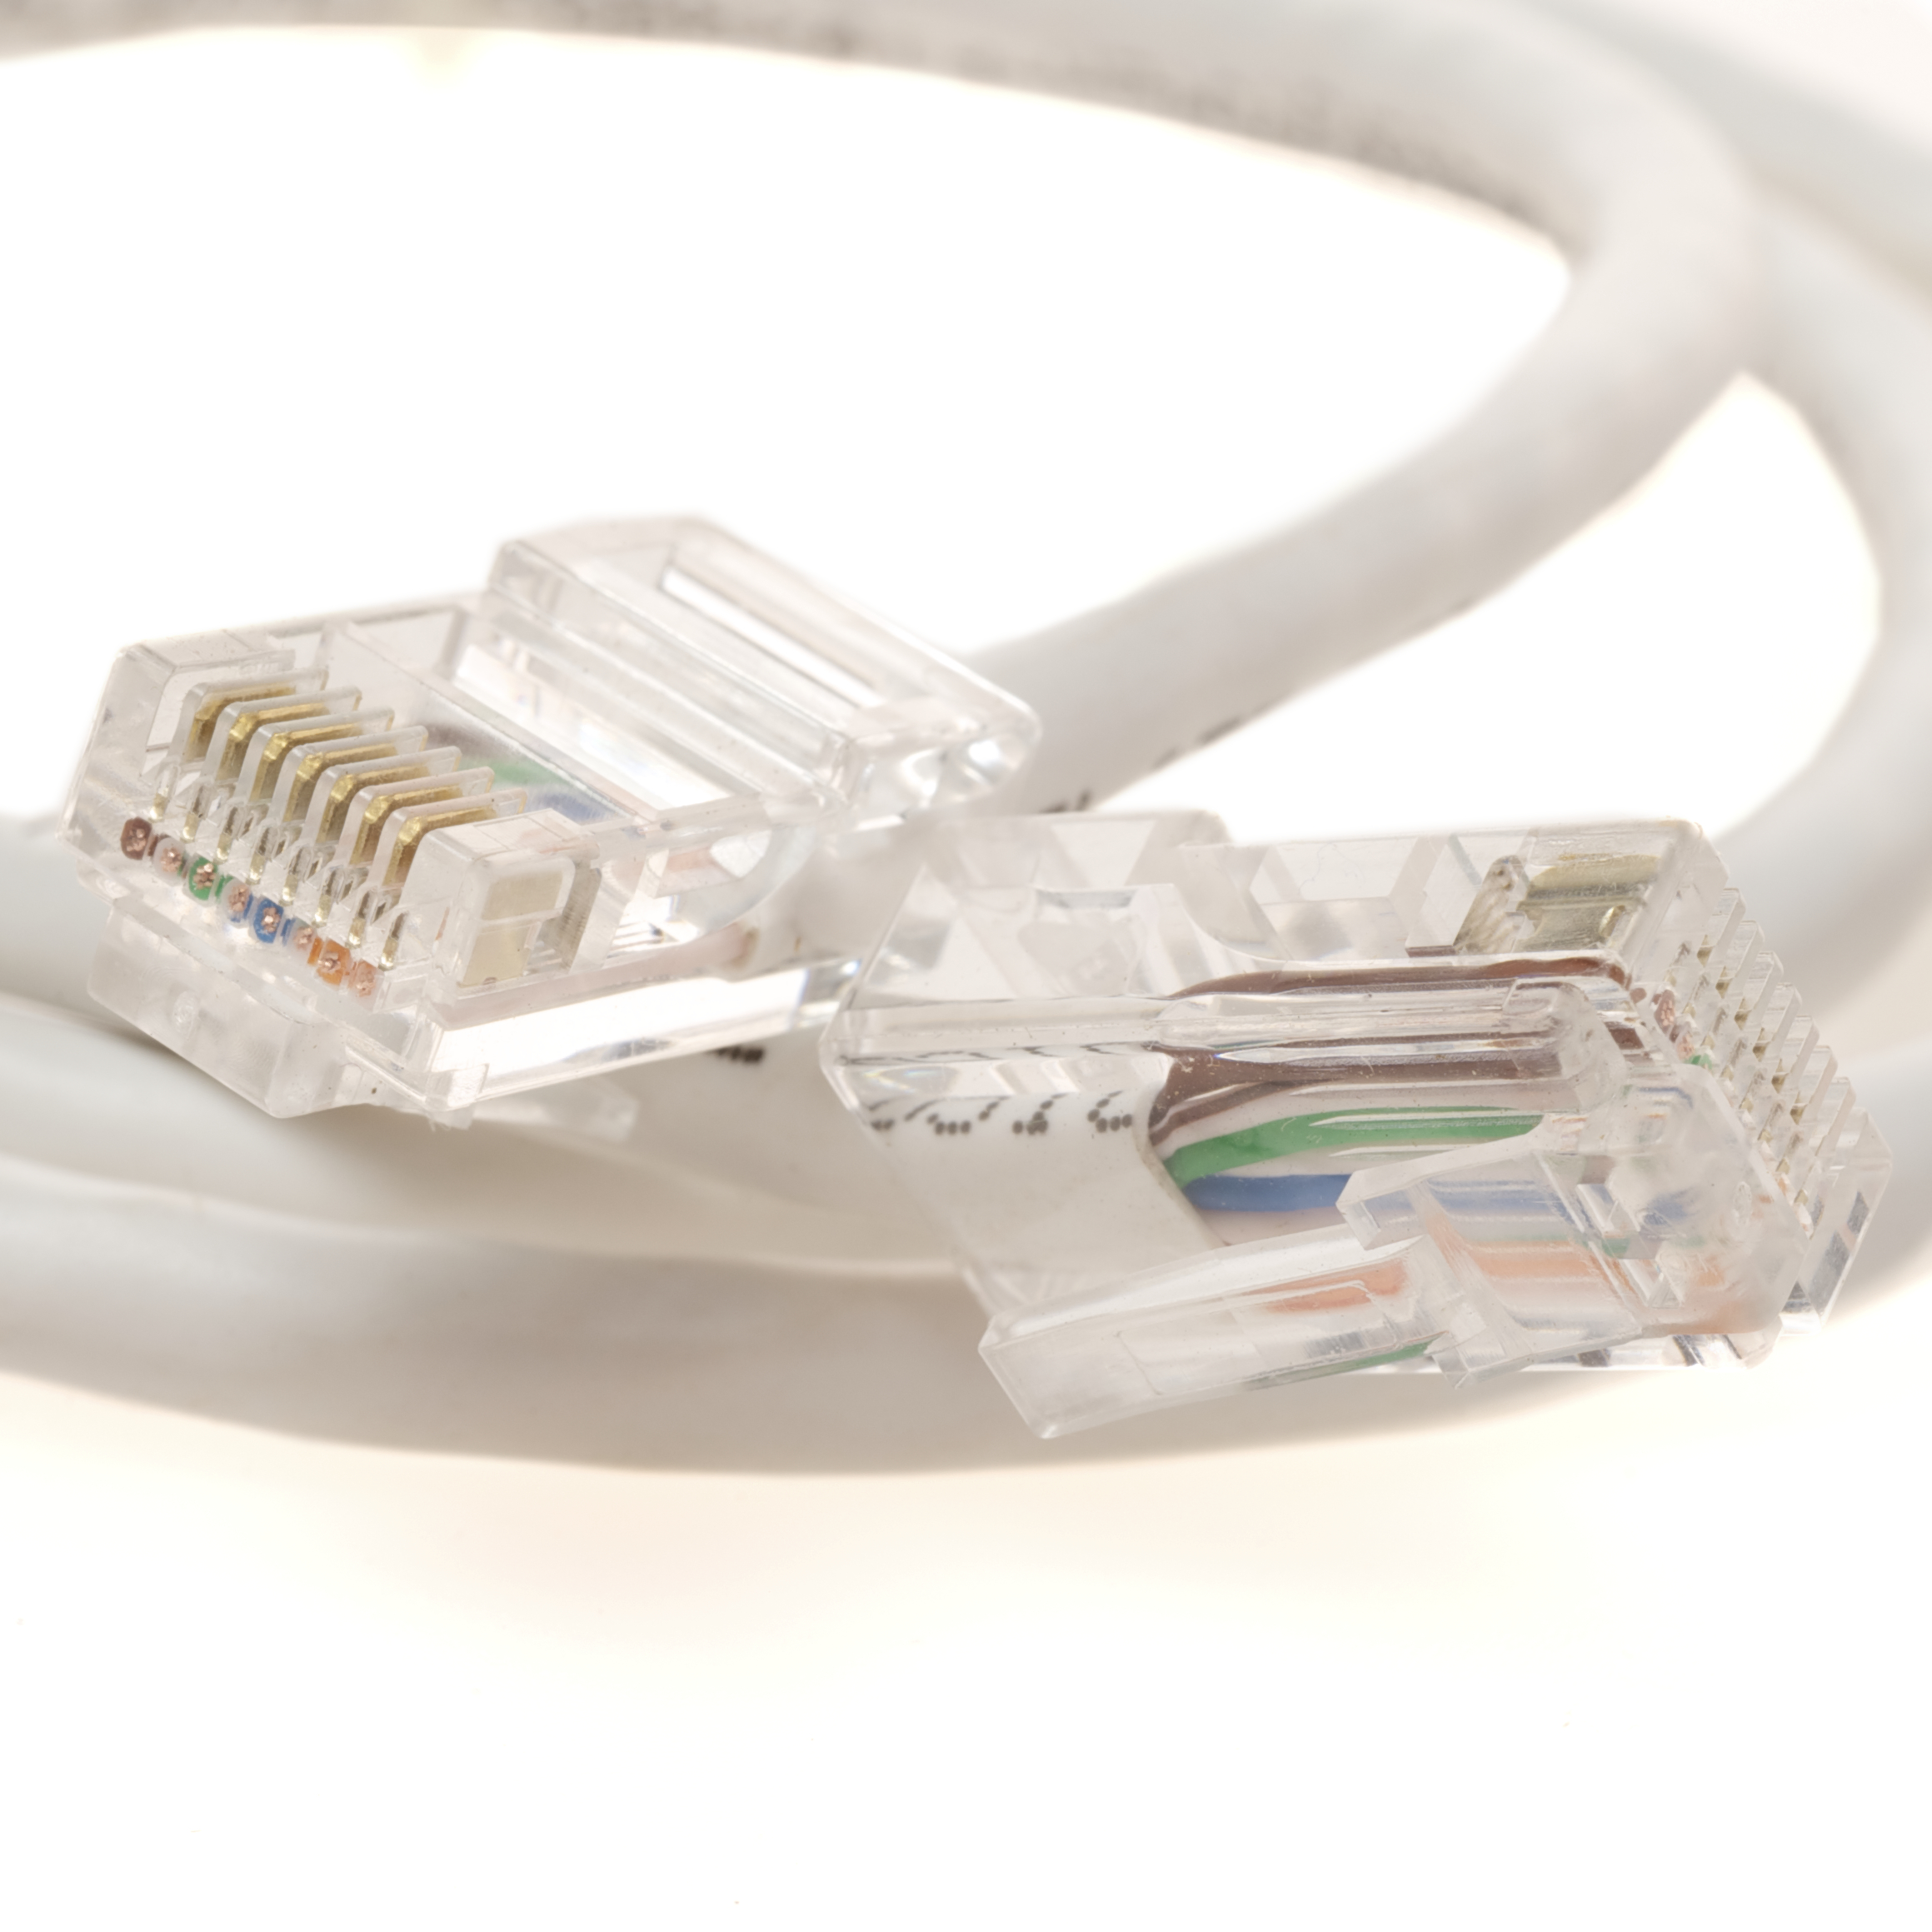 Plenum Rated Category 6 Ethernet Cables in White